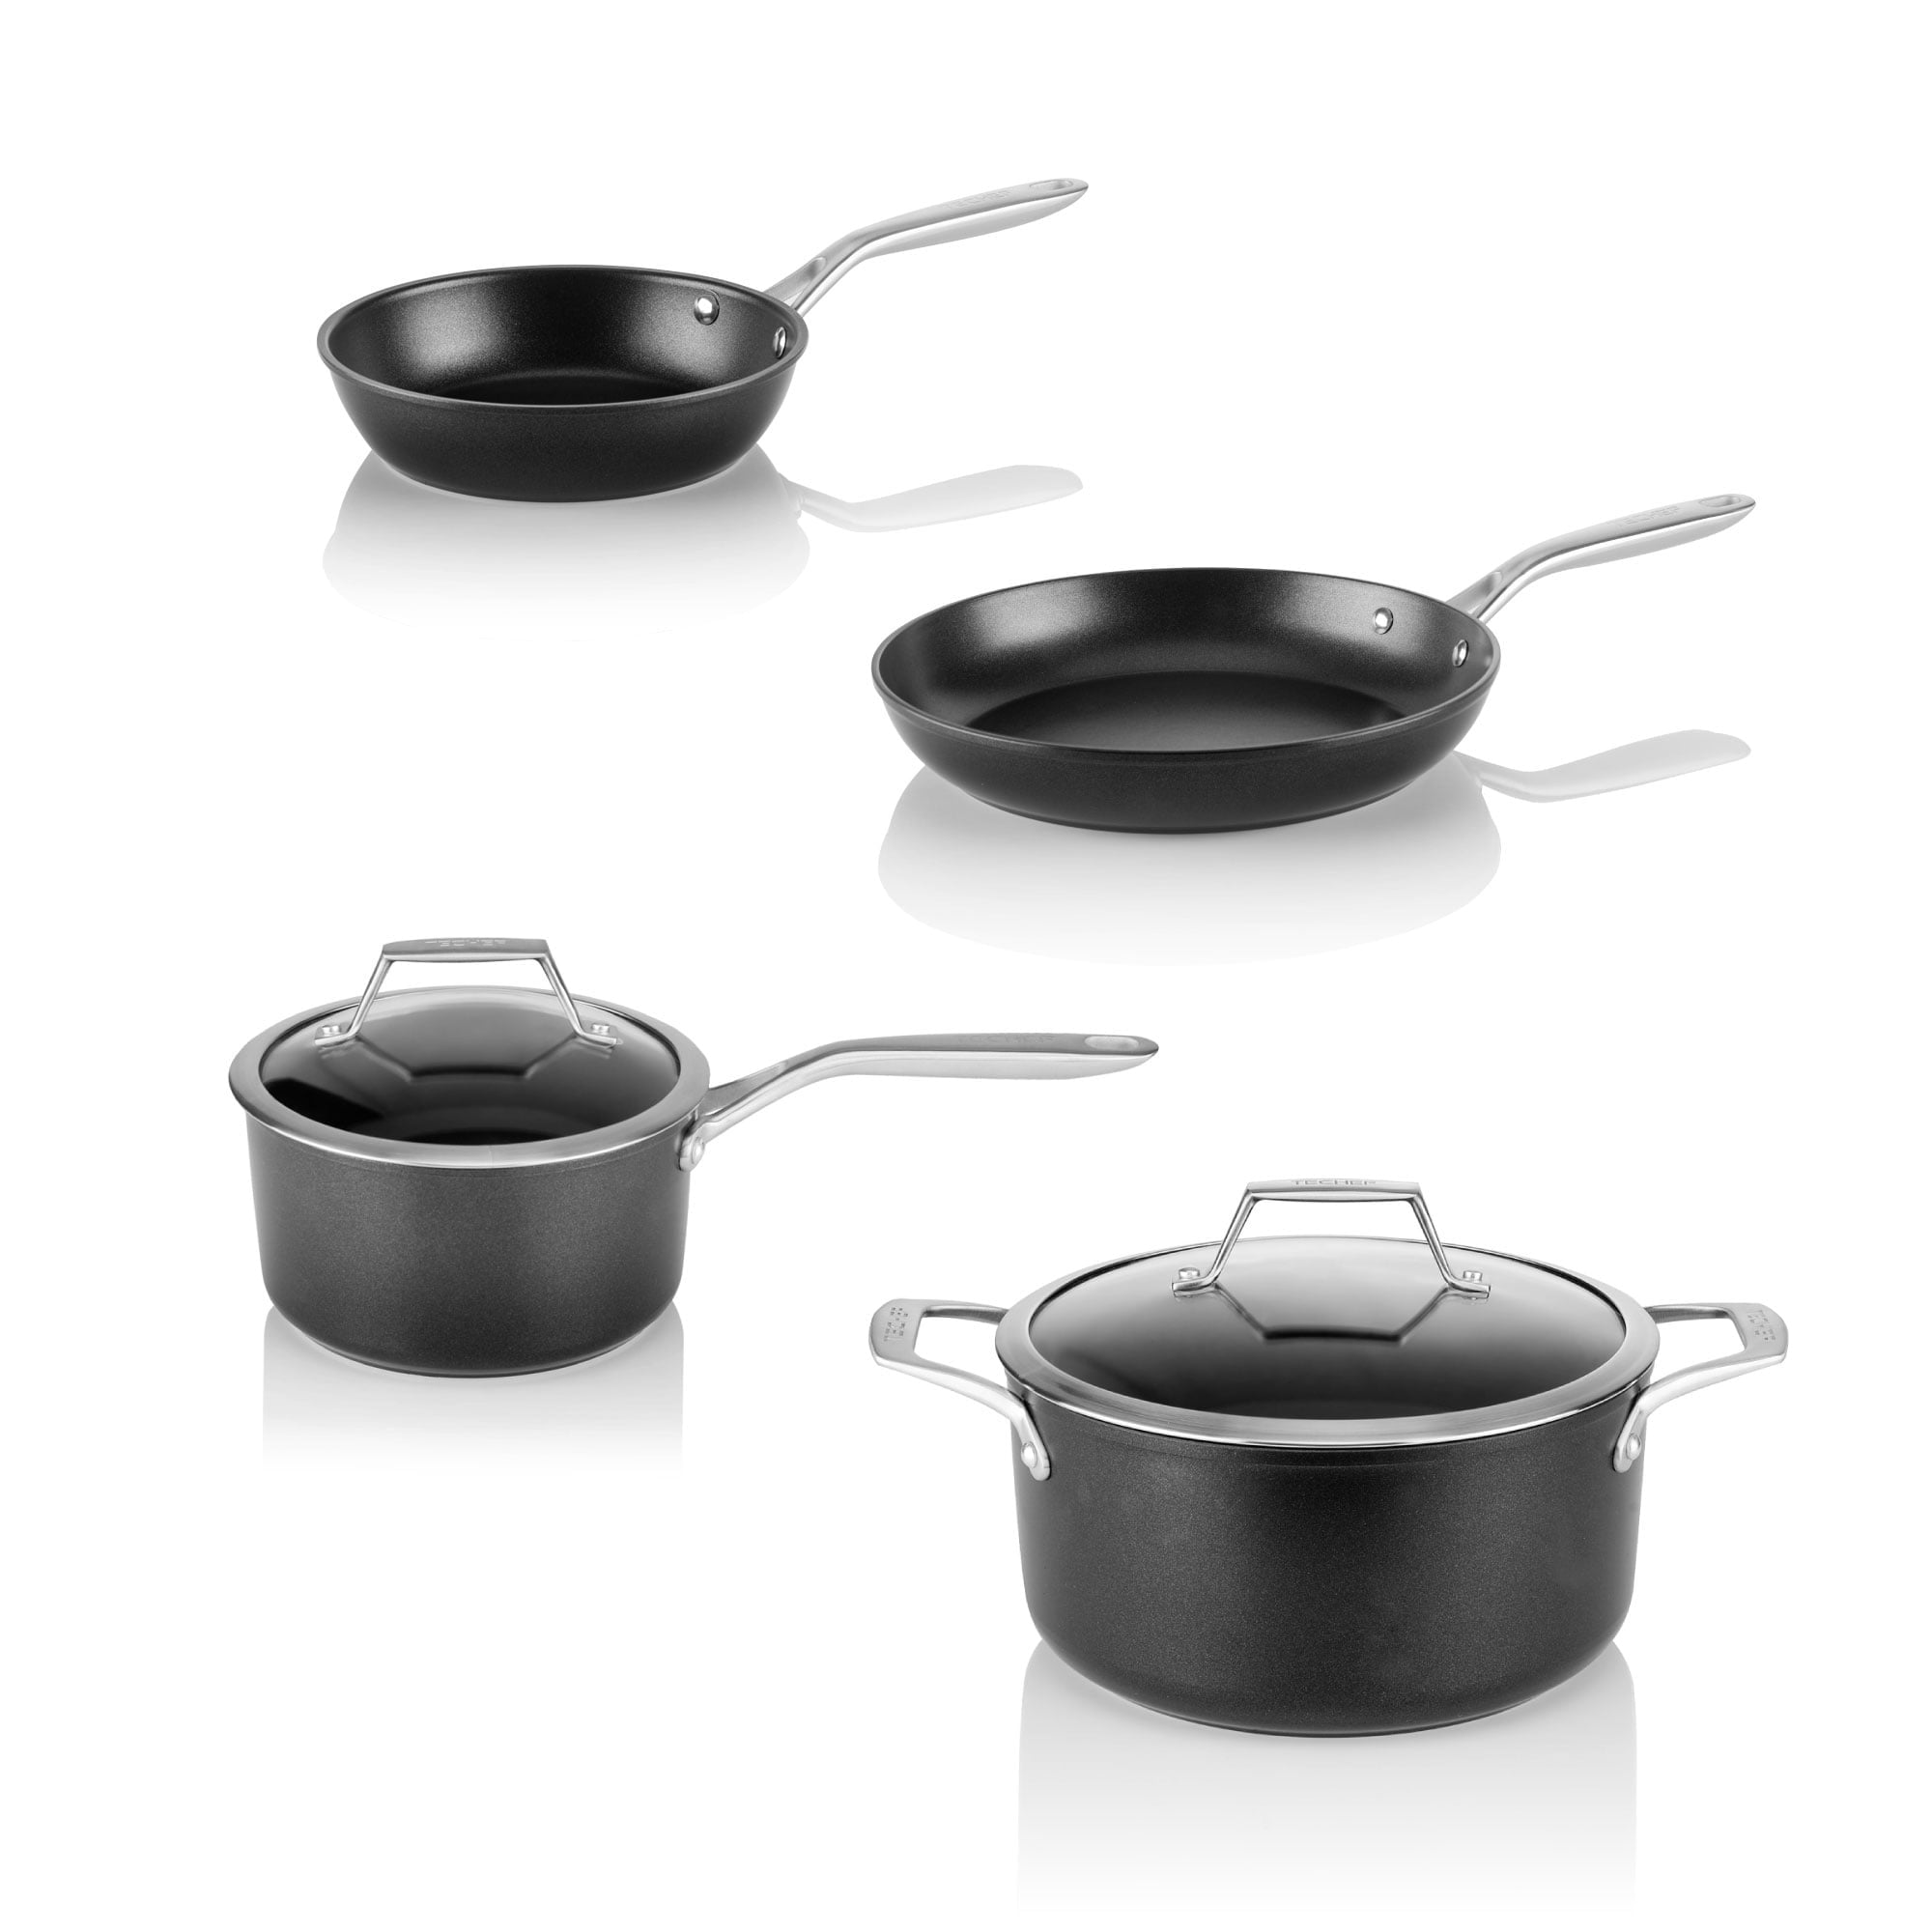 TECHEF - Onyx Collection, 12 Nonstick Flat Bottom Wok/Stir-Fry Pan with  Glass Lid, PFOA Free, Dishwasher and Oven Safe, Made in Korea